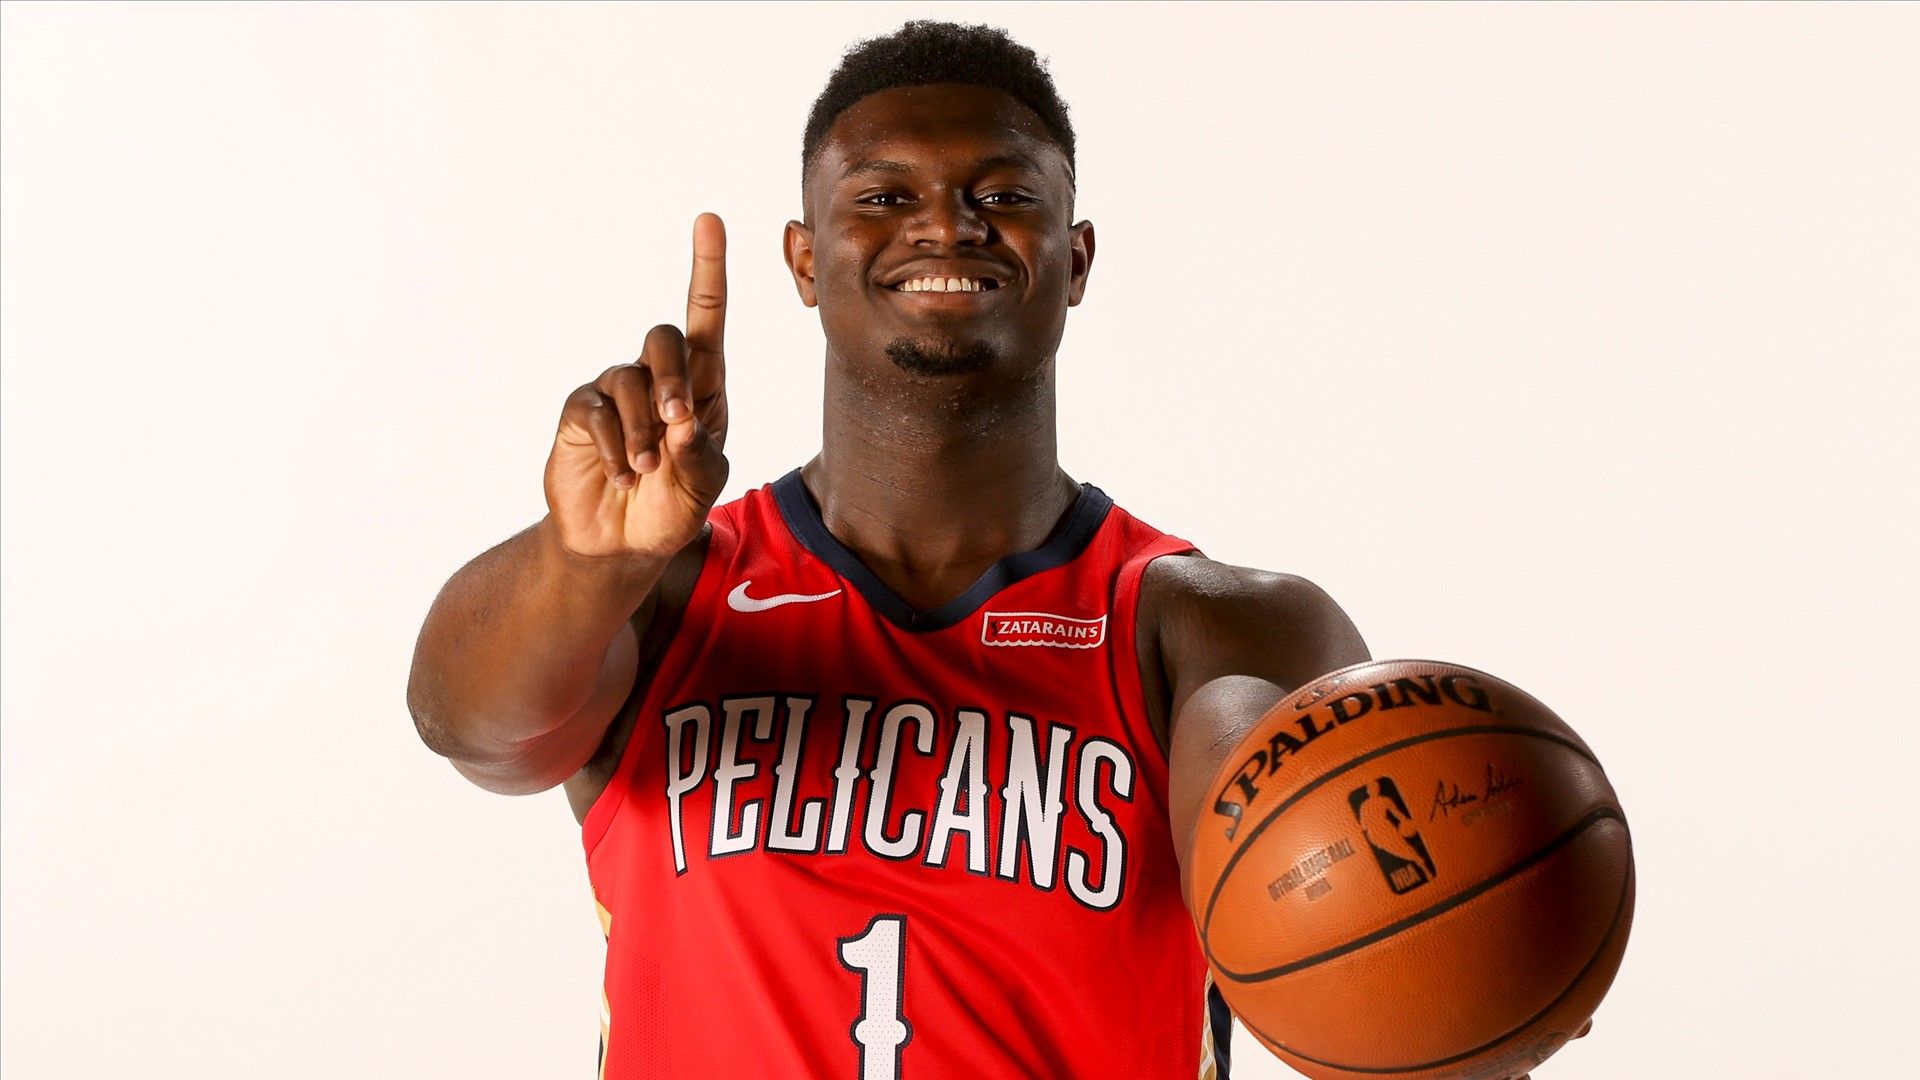 Pelicans rookie Zion Williamson wants to play for the franchise for his entire career. NBA.com India. The official site of